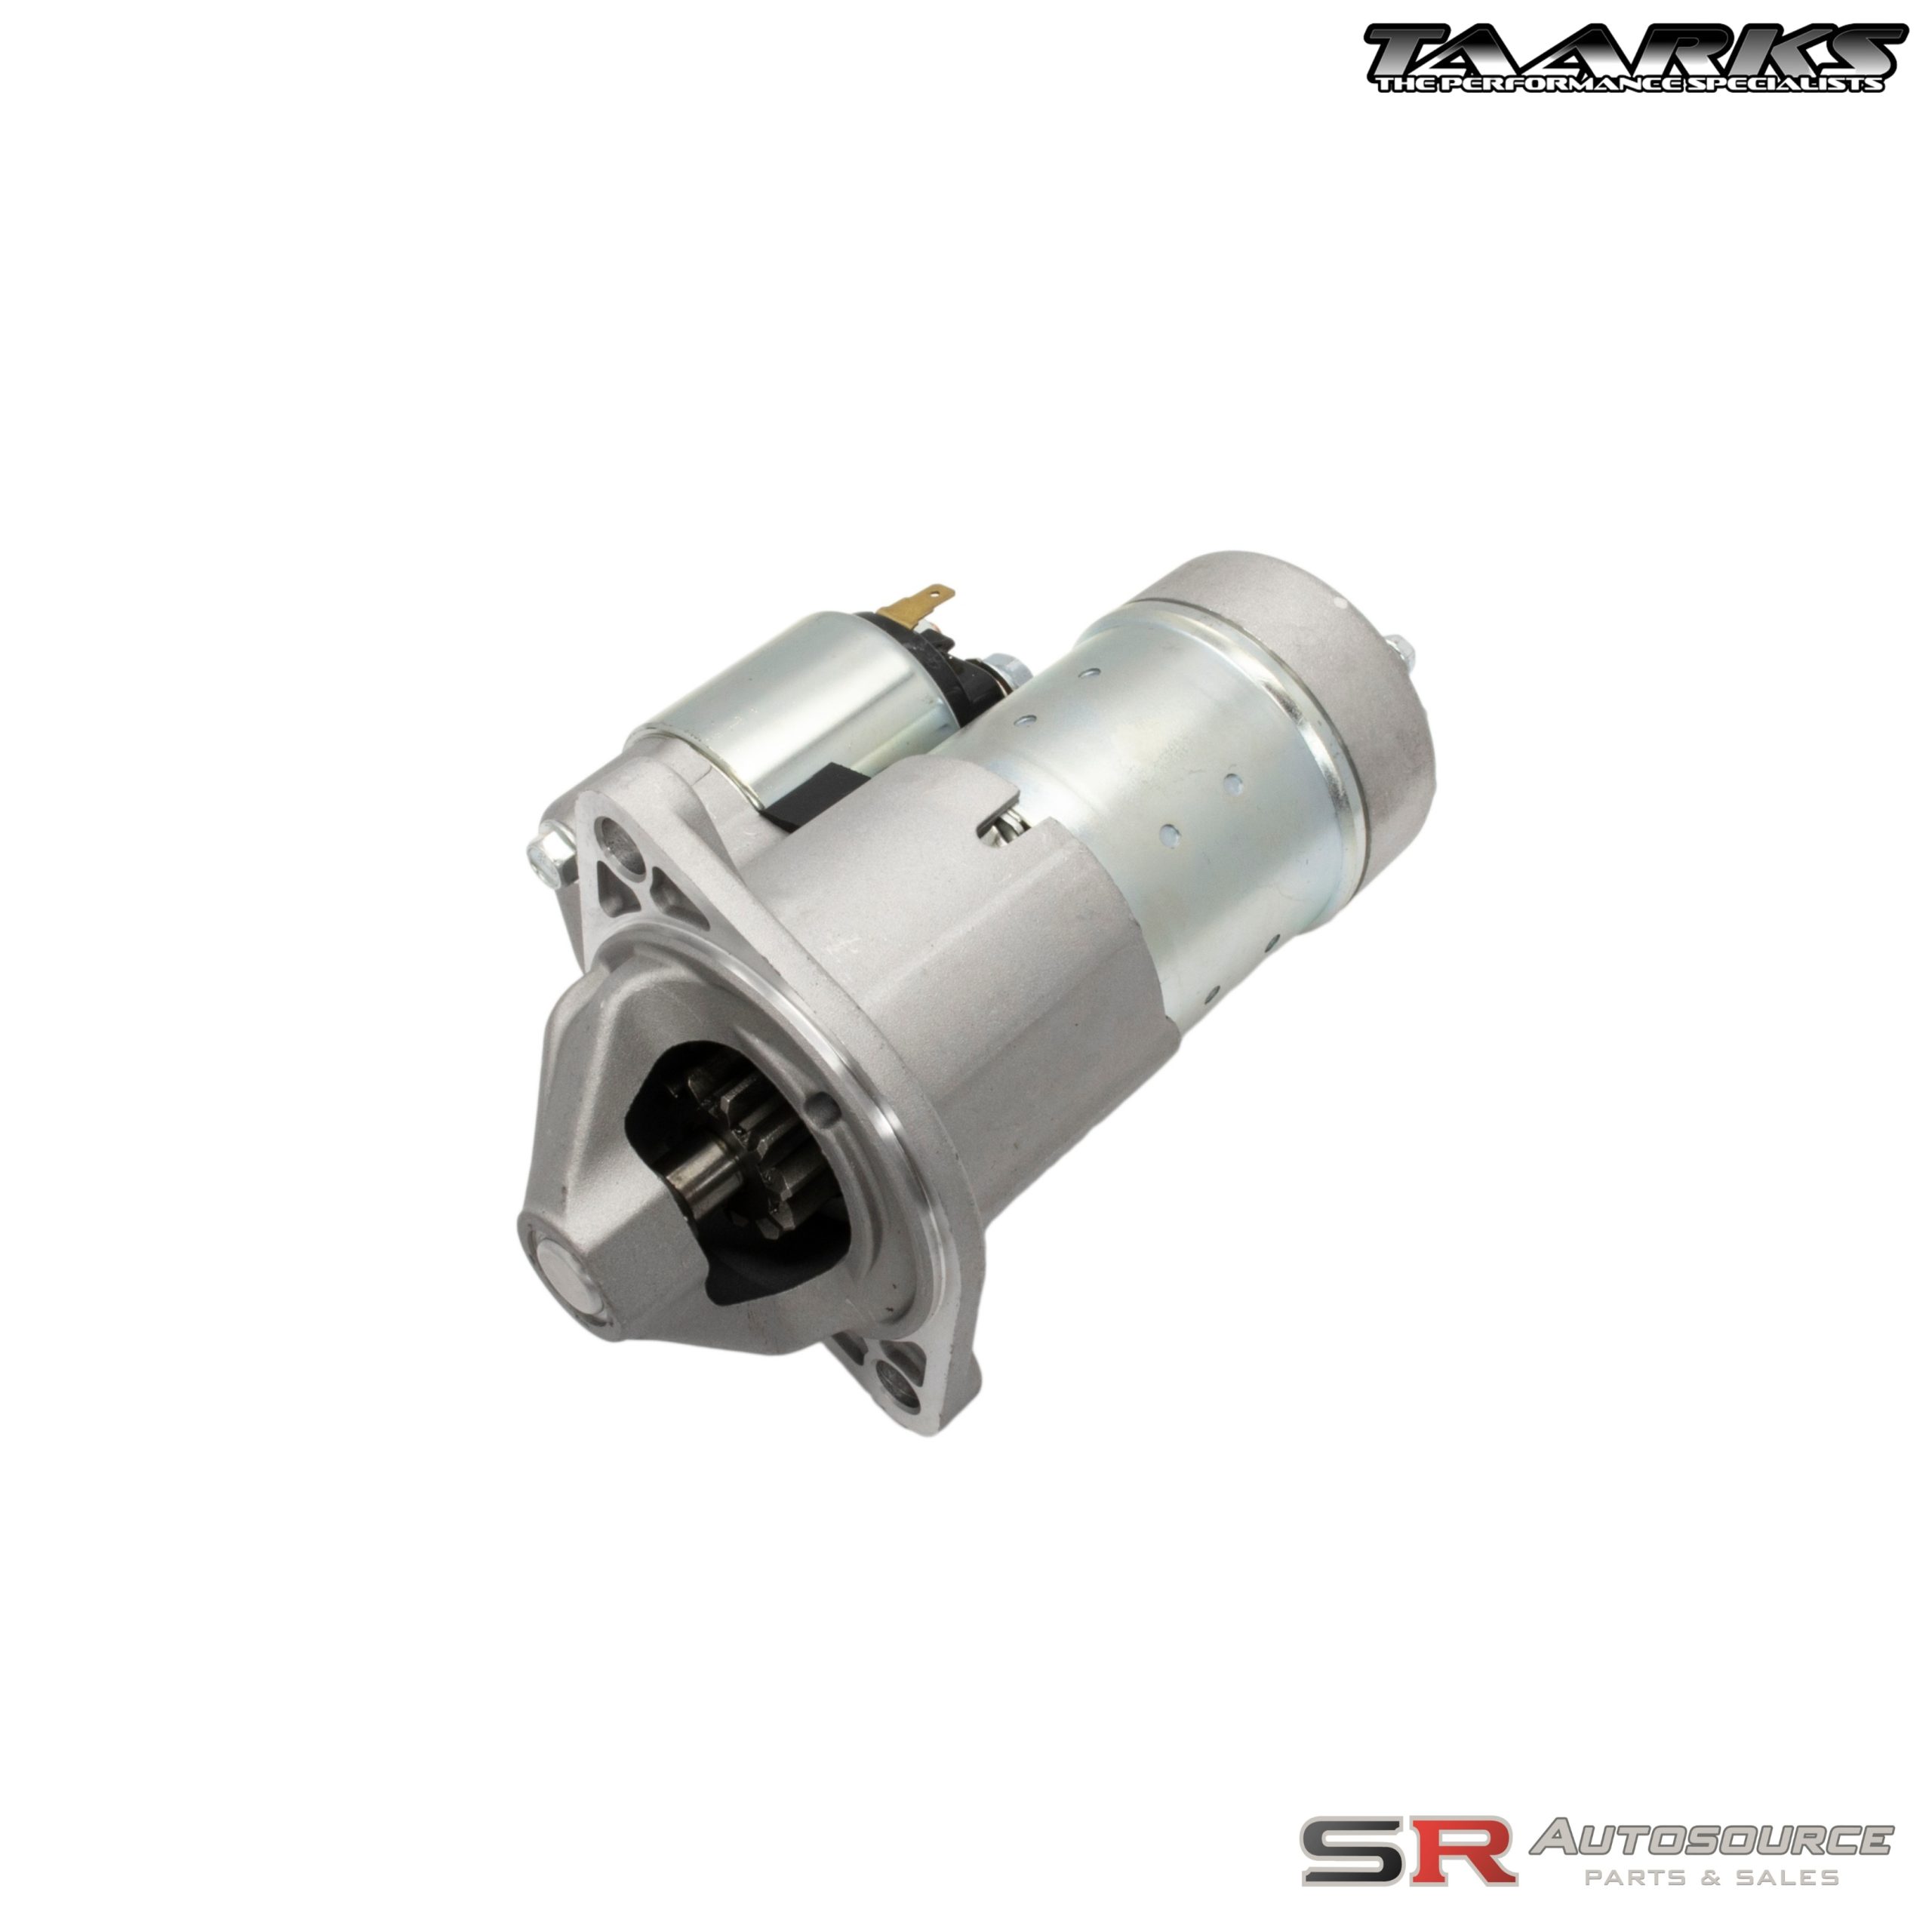 Taarks Replacement Starter Motor for RB Engines